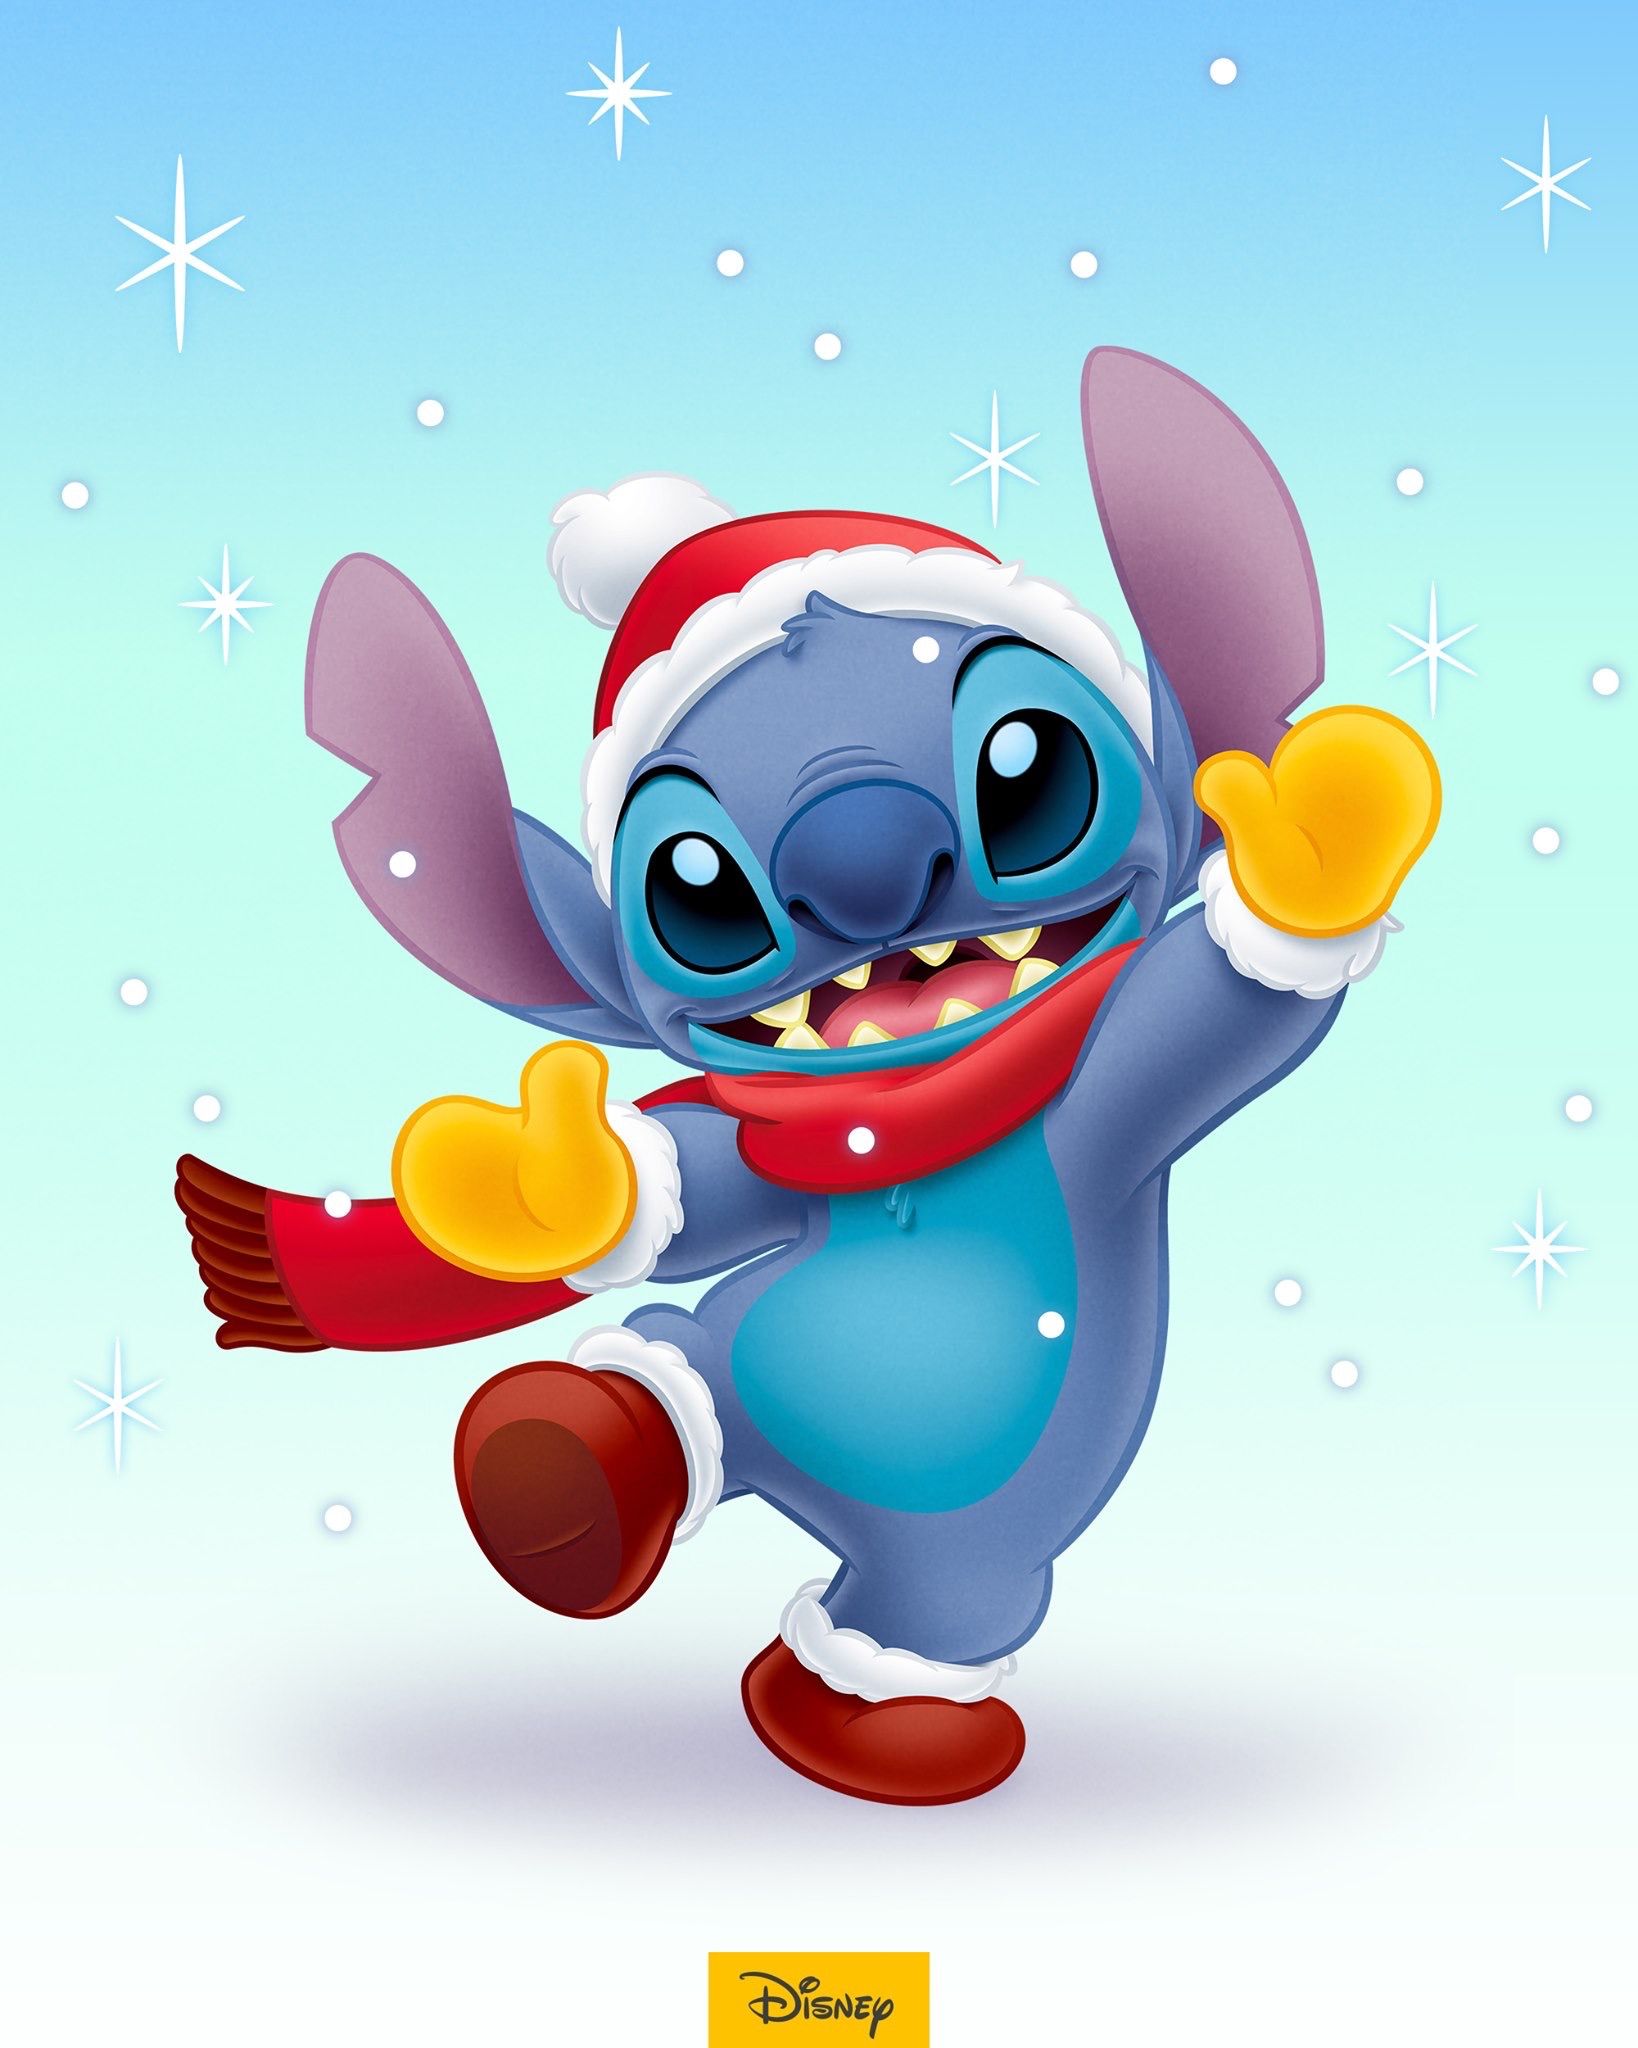 Margueritte Lopes on disney christmas wallpapers.